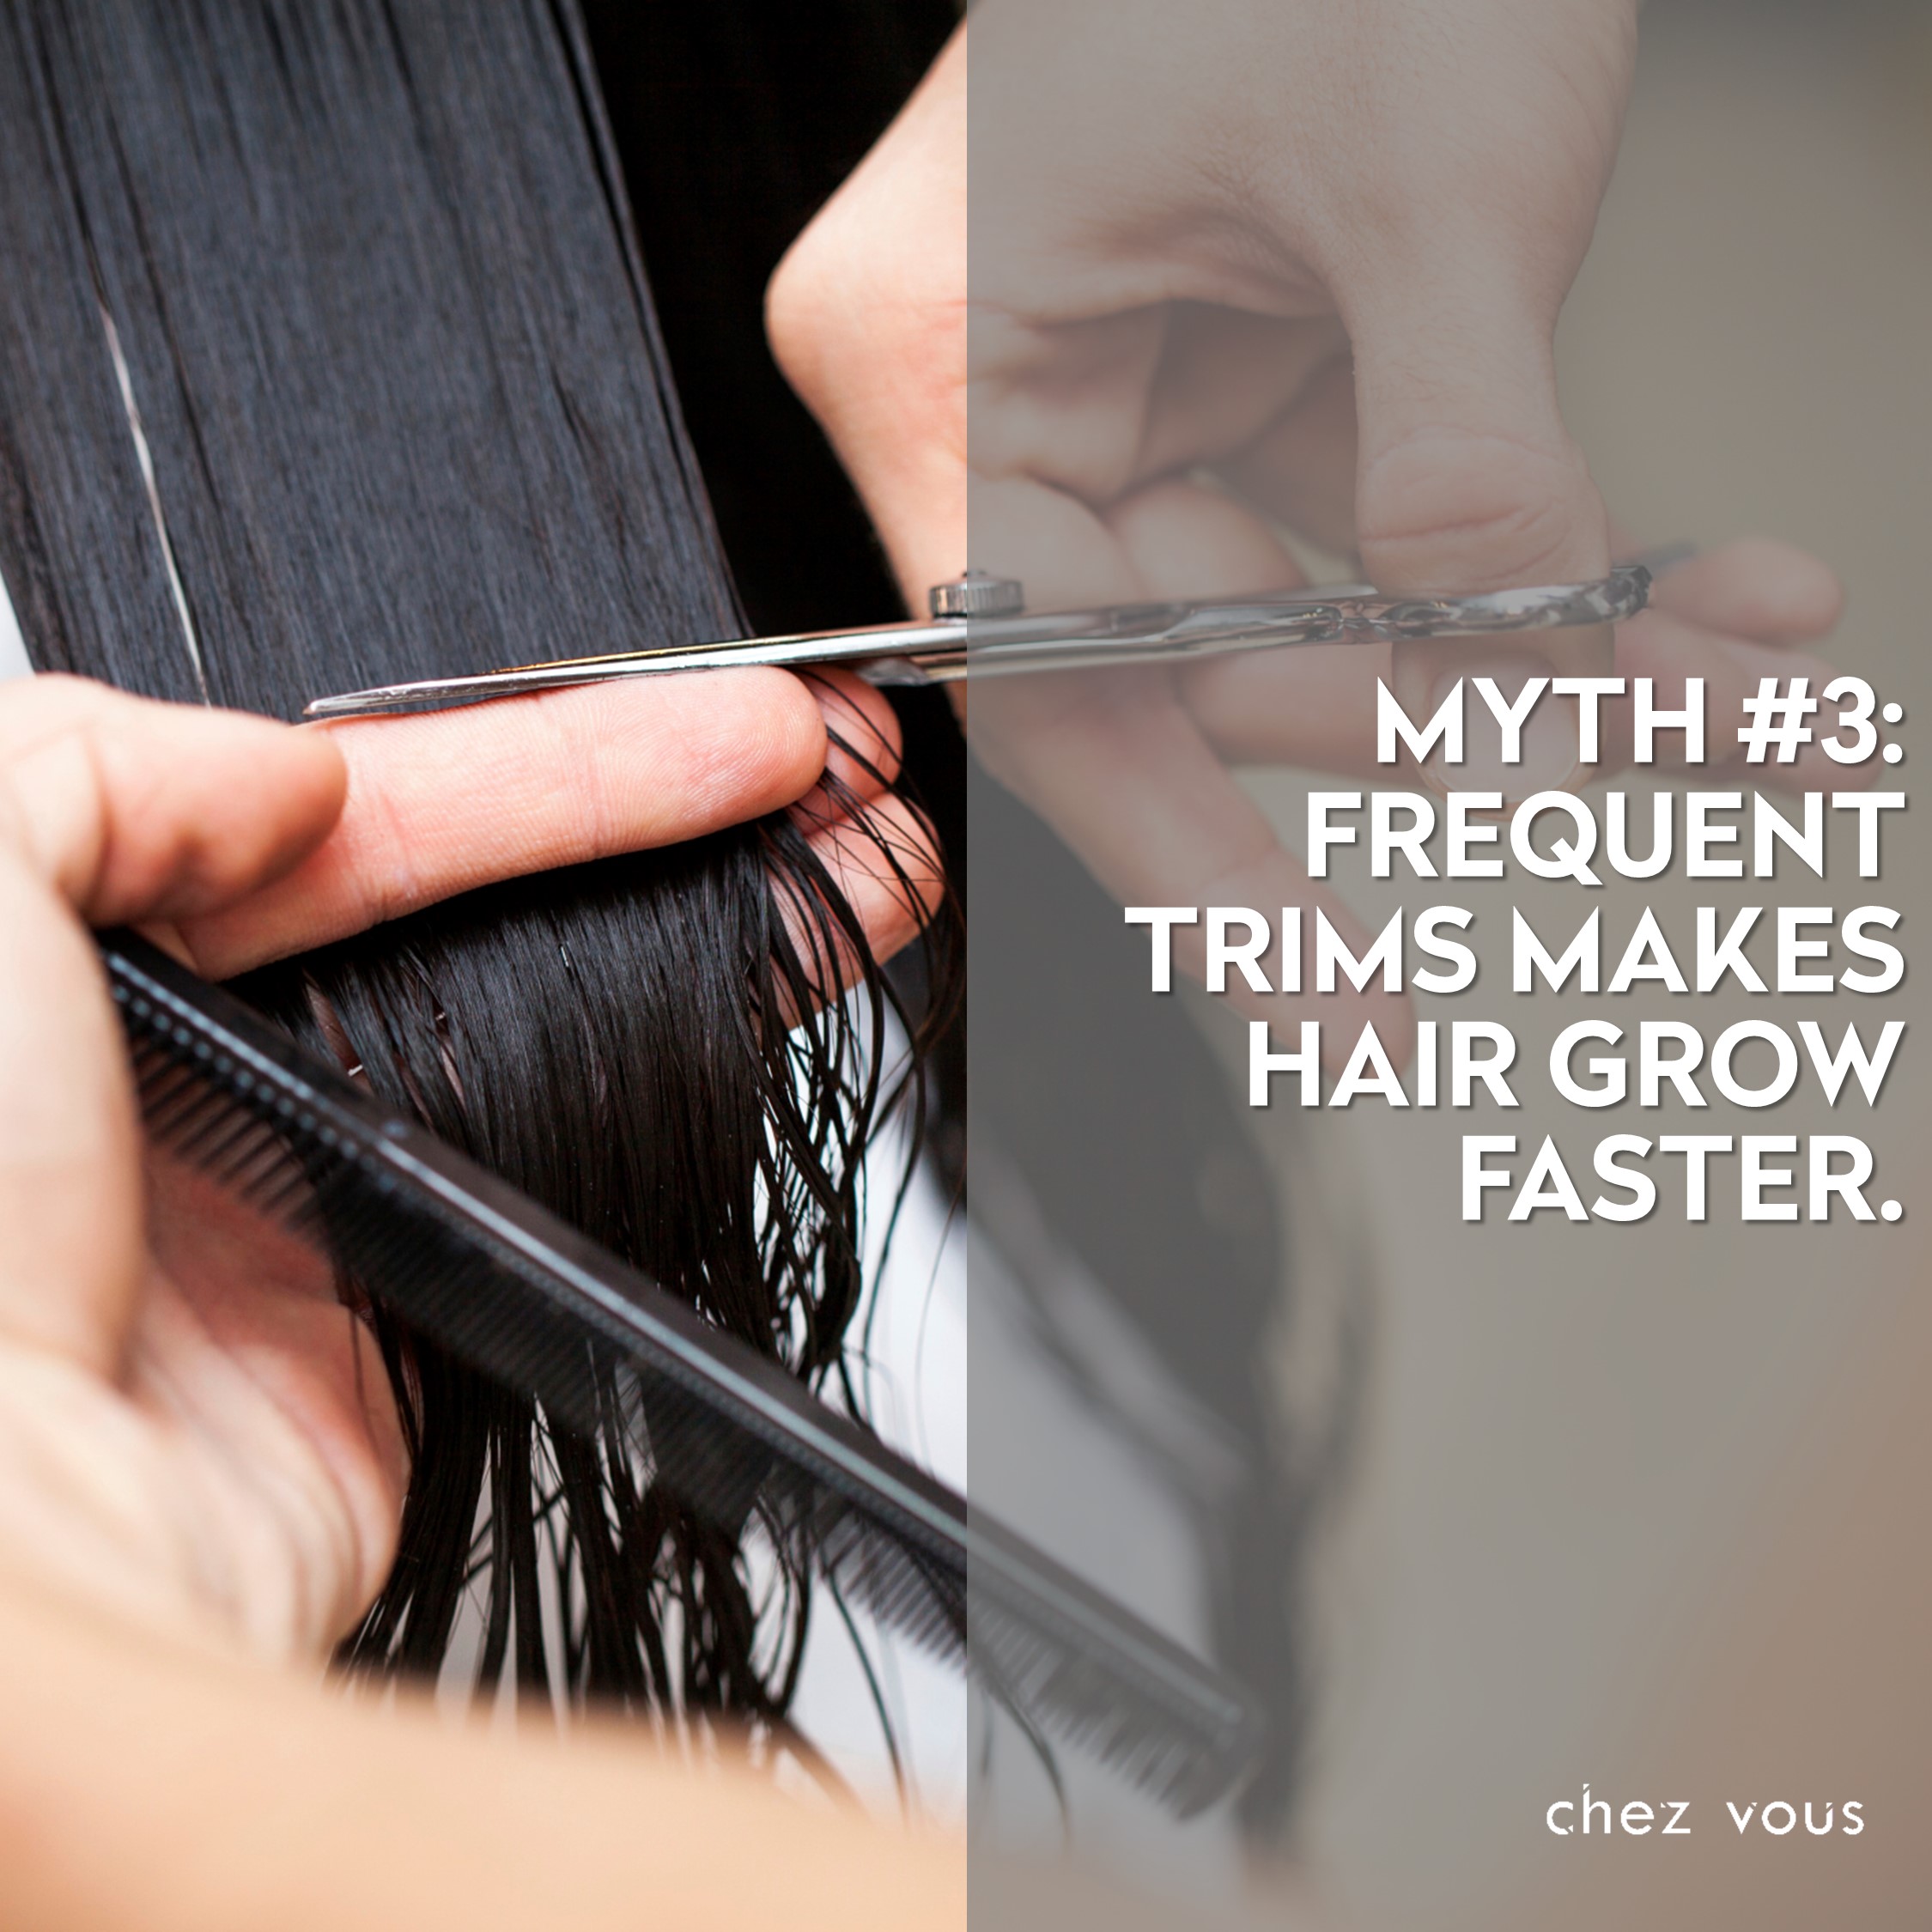 5 Hair Myths You Should Stop Believing: Transforming Hair Myths to Hair Tips